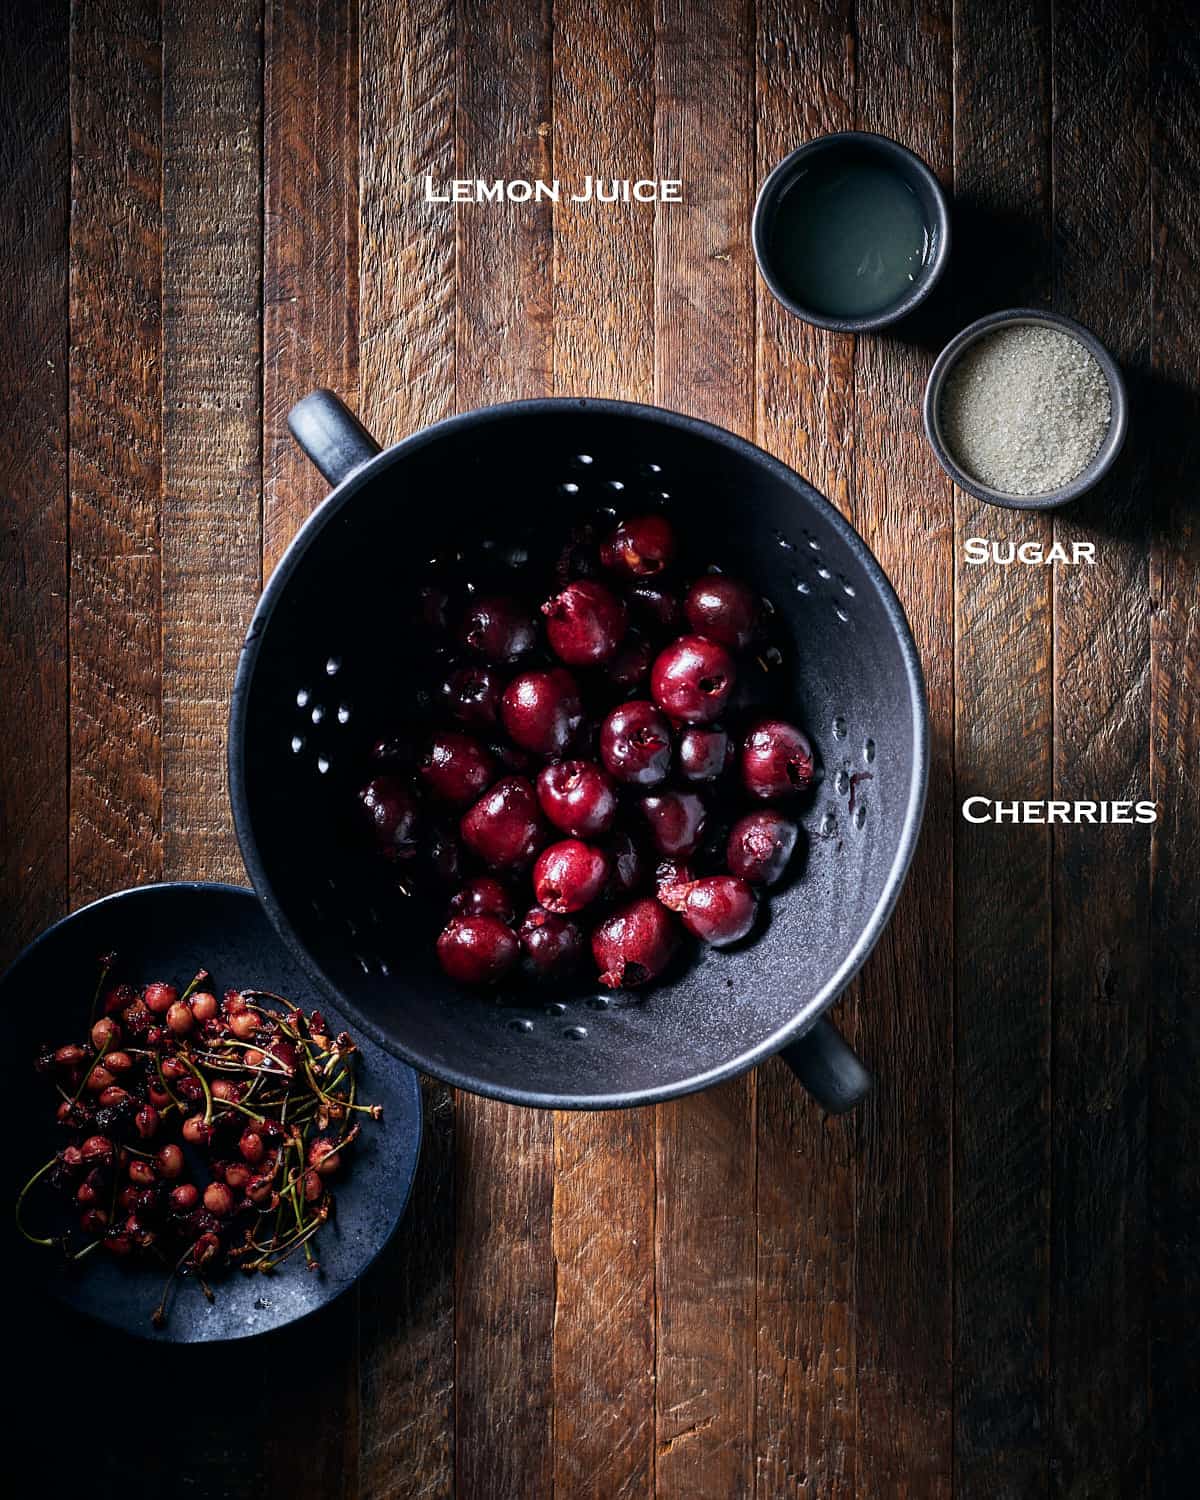 Ingredients to make cherry compote on wood background.